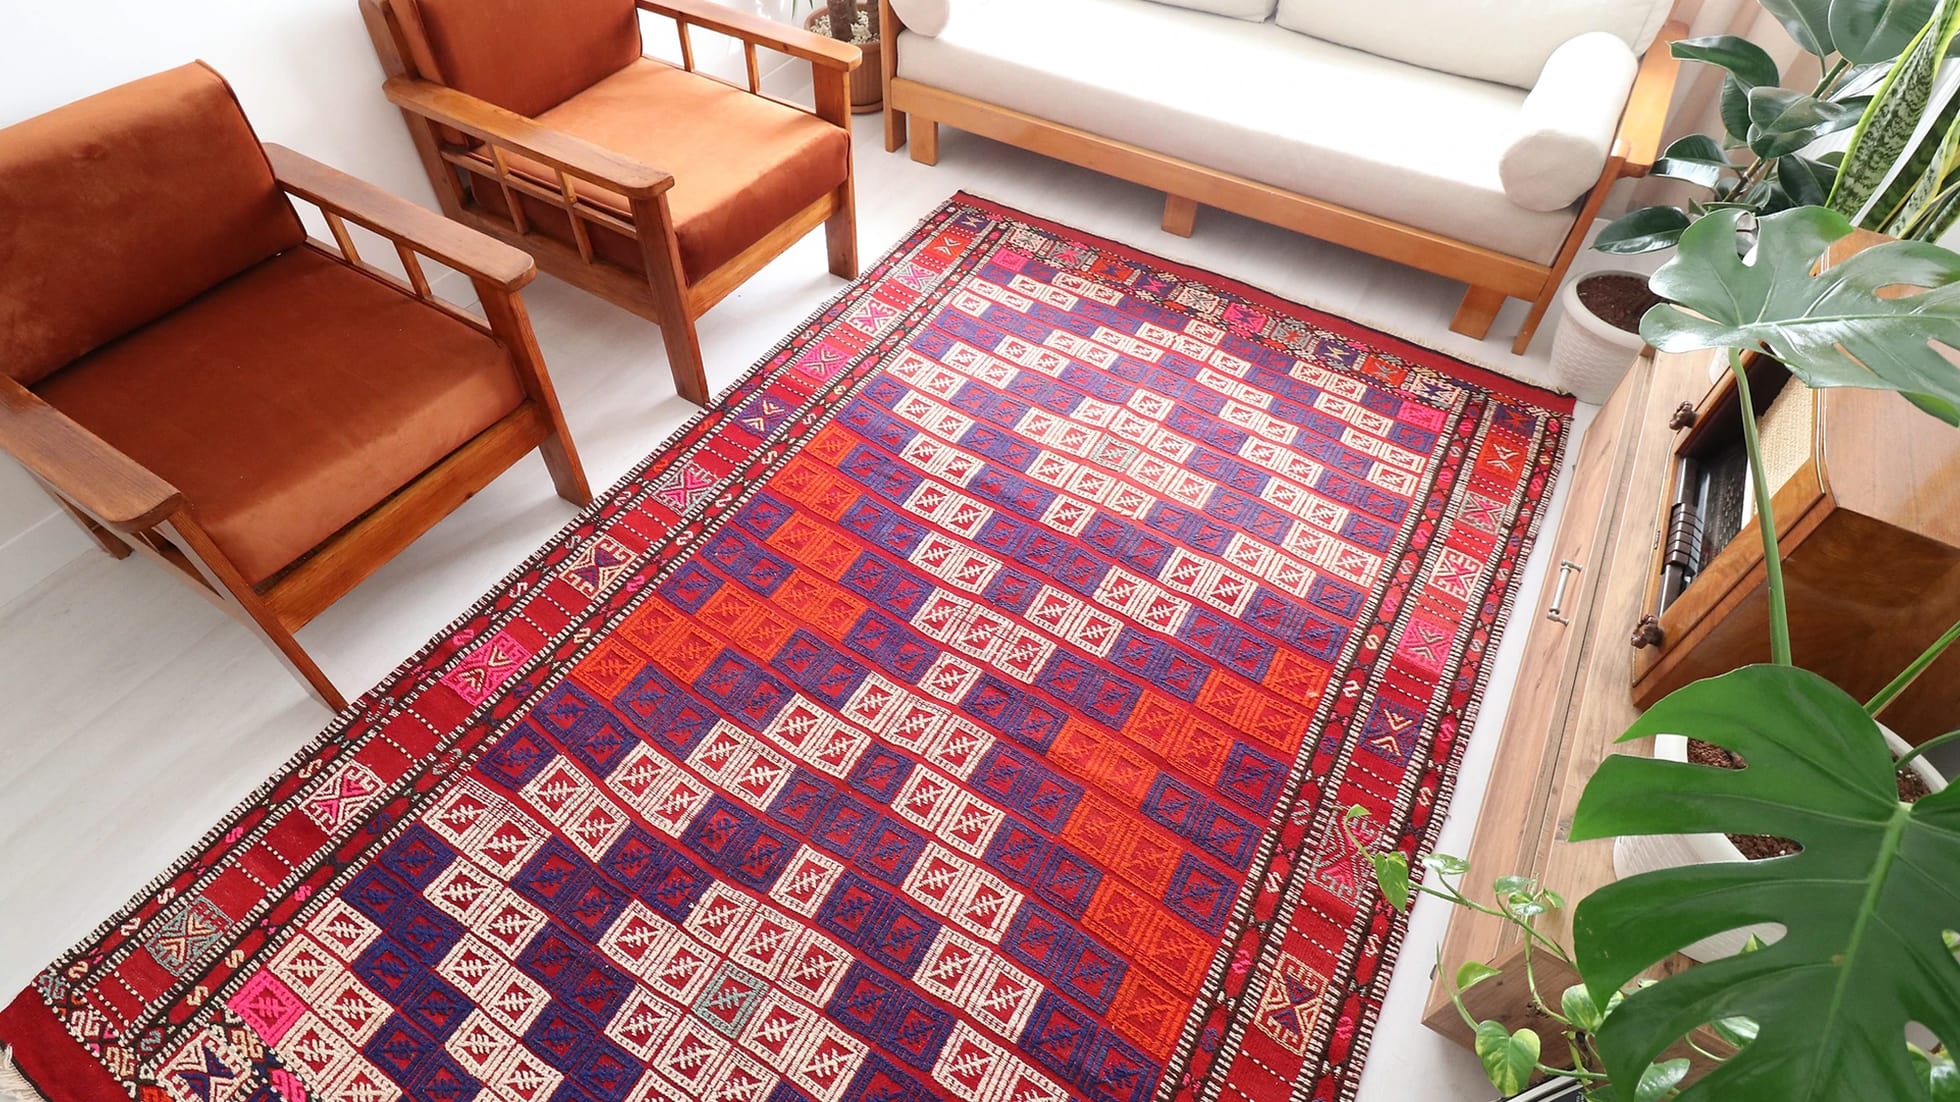 Vintage hand woven Cecim Kilim Rug with vibrant hues in pink, red and purple